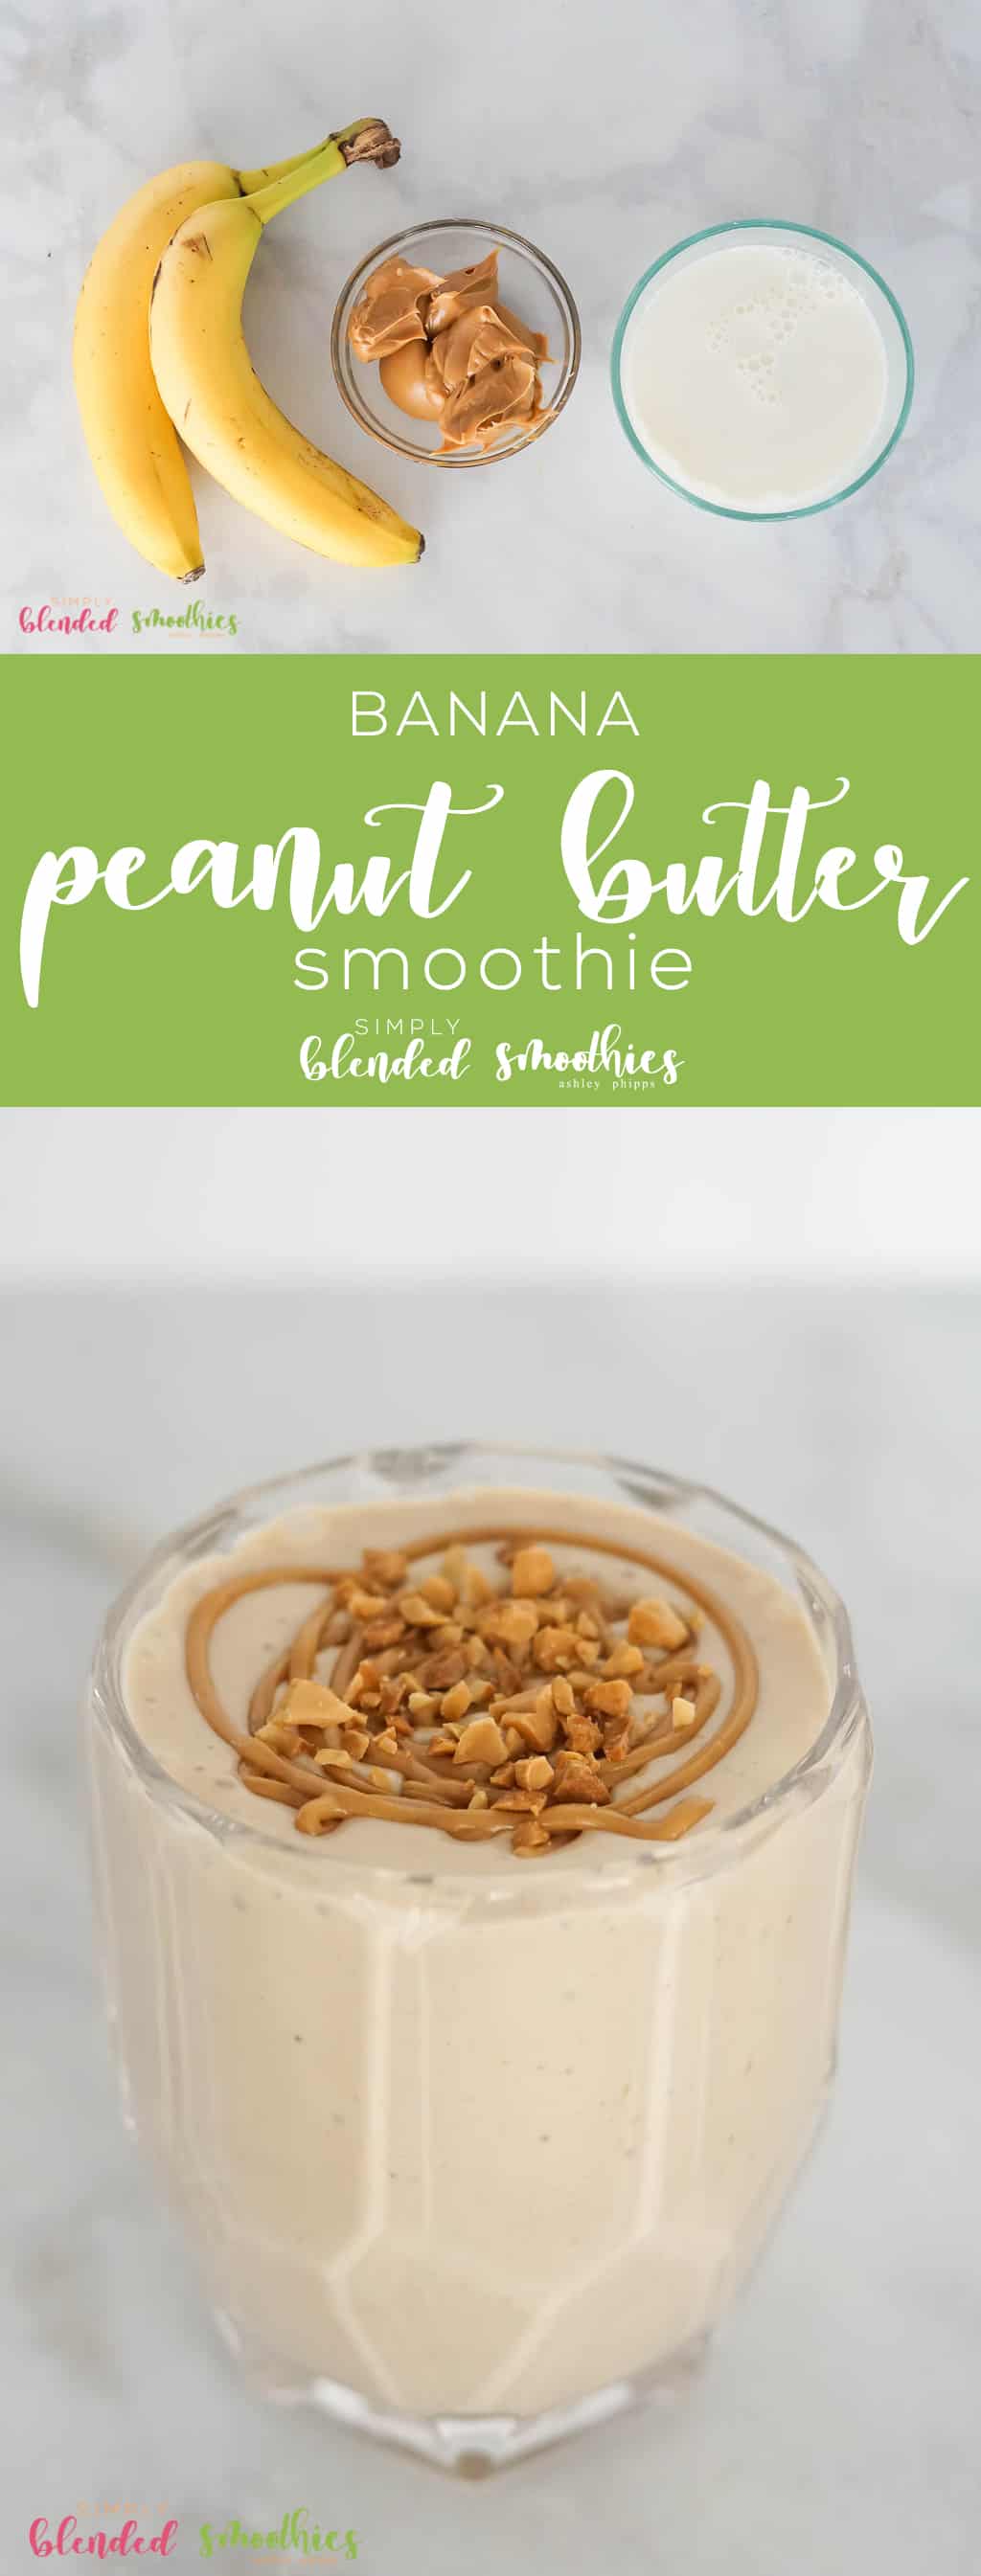 This Scrumptious And Healthy Peanut Butter Banana Smoothie Has A Rich Peanut Butter And Banana Flavor To It And Is Seriously The Best Pb Banana Smoothie